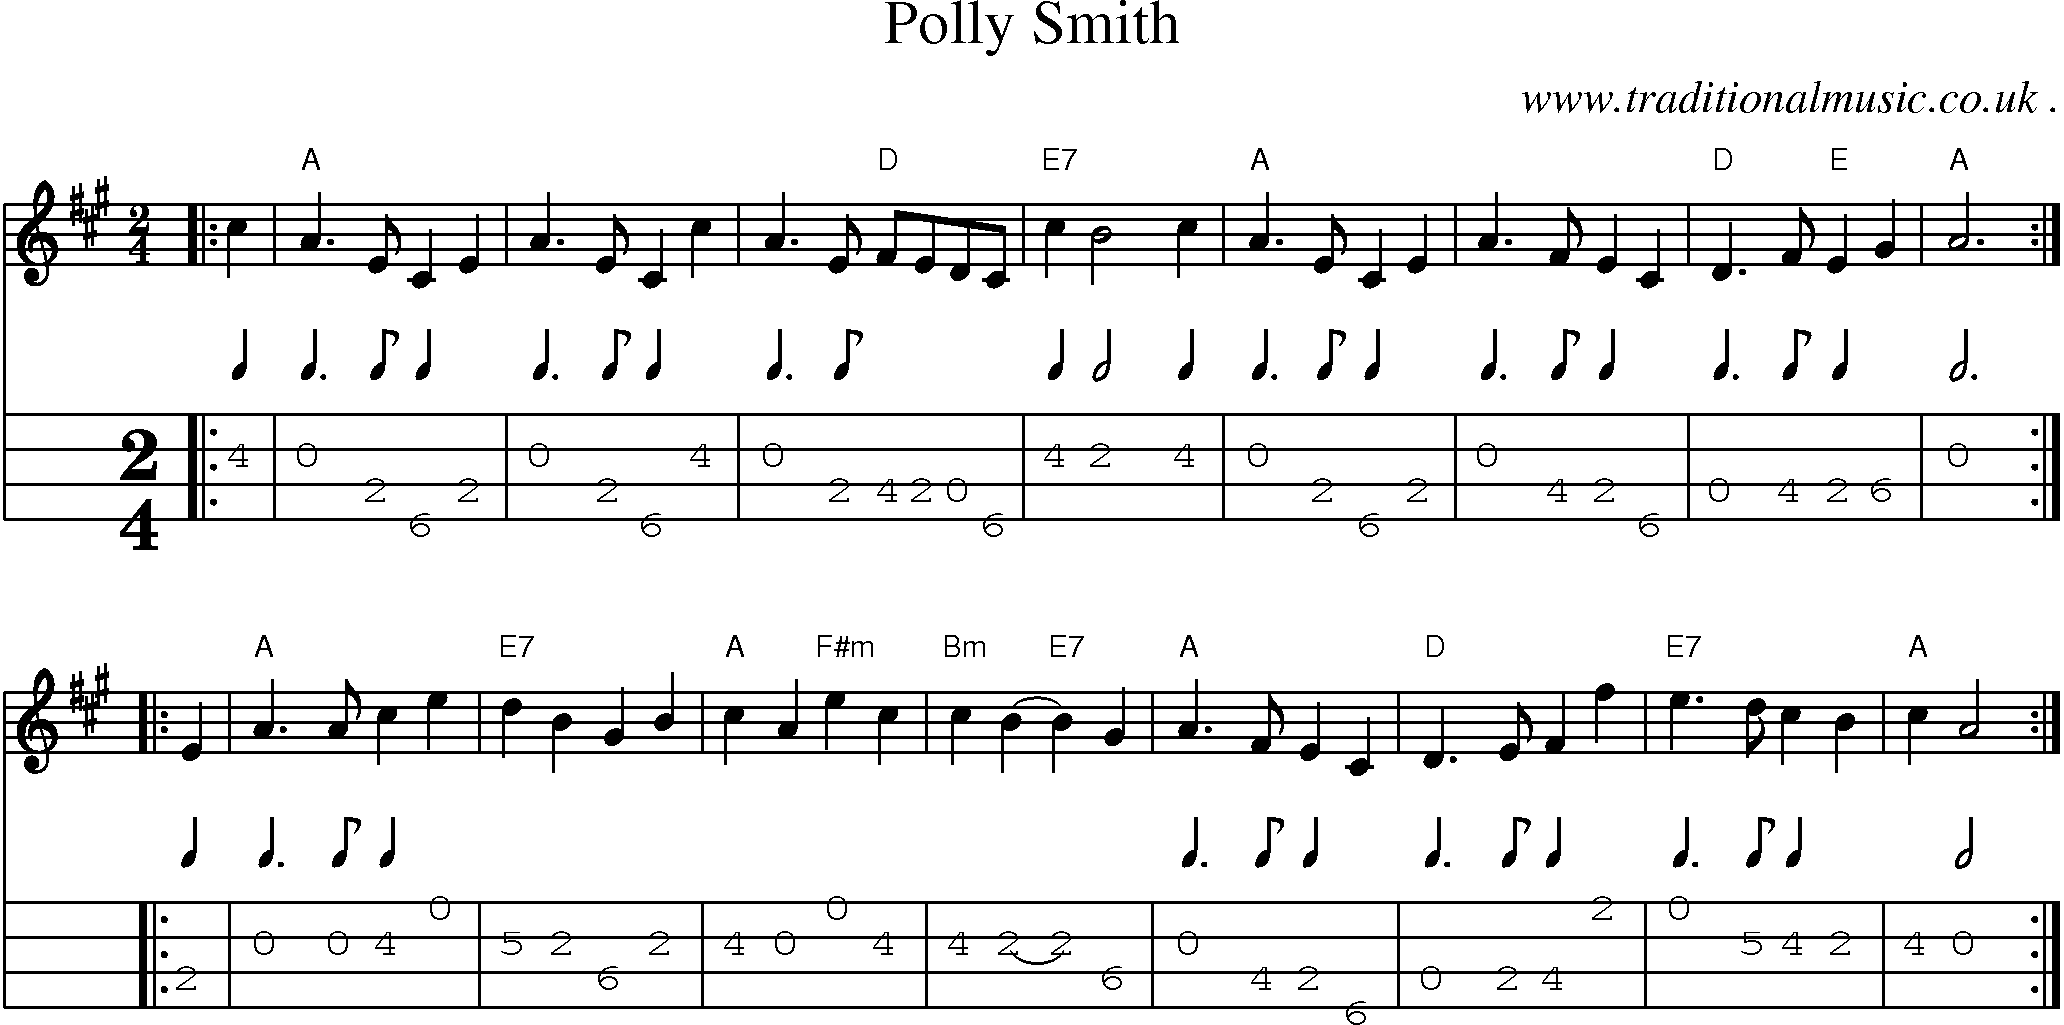 Sheet-music  score, Chords and Mandolin Tabs for Polly Smith